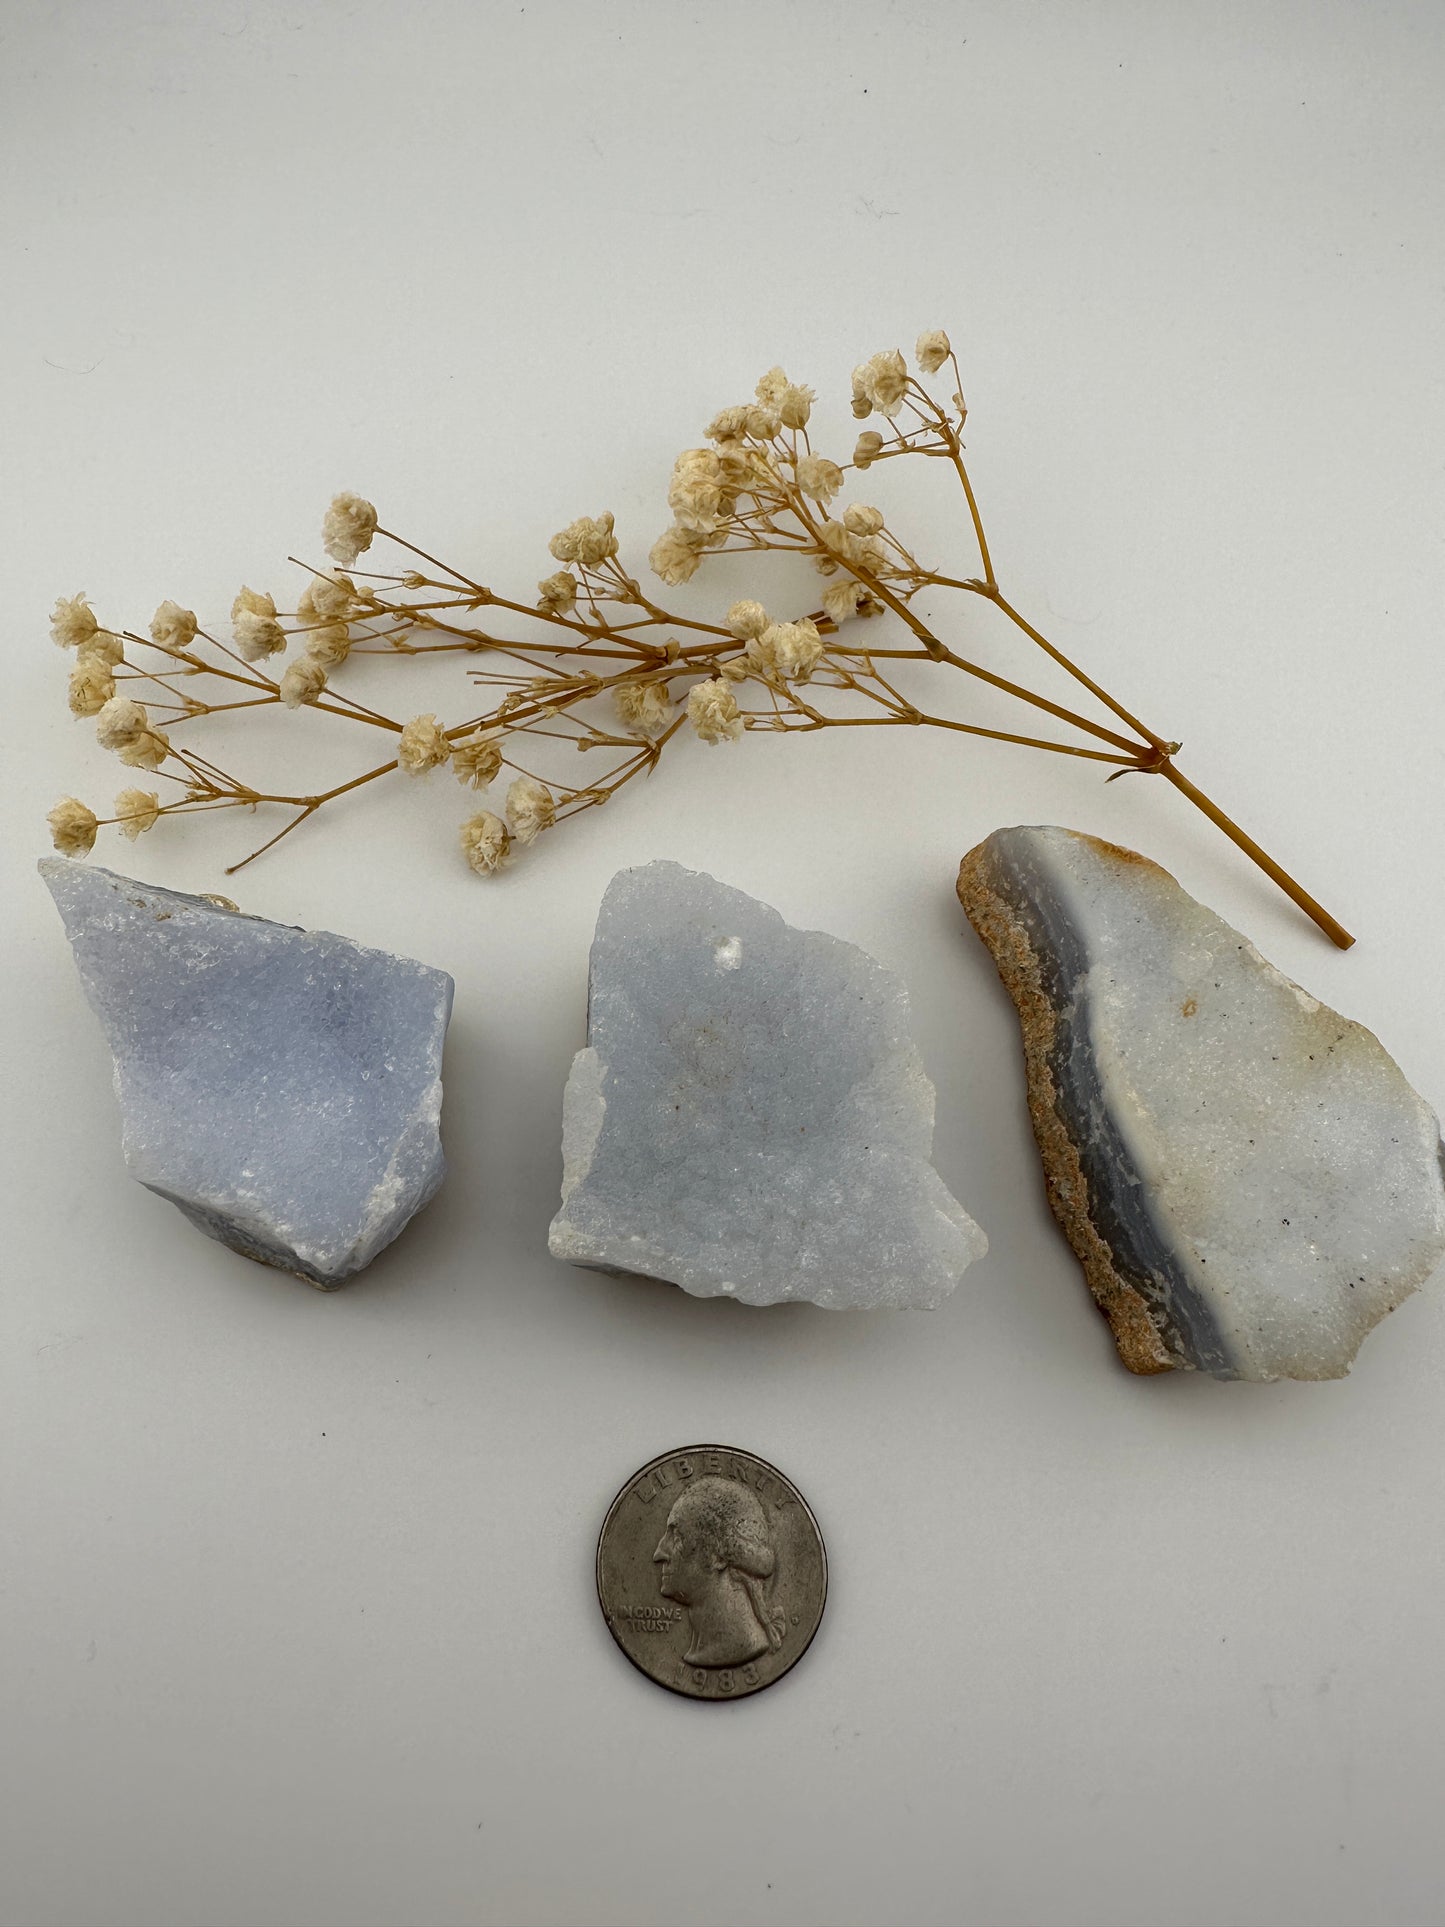 Raw blue lace agate chunks with druzy